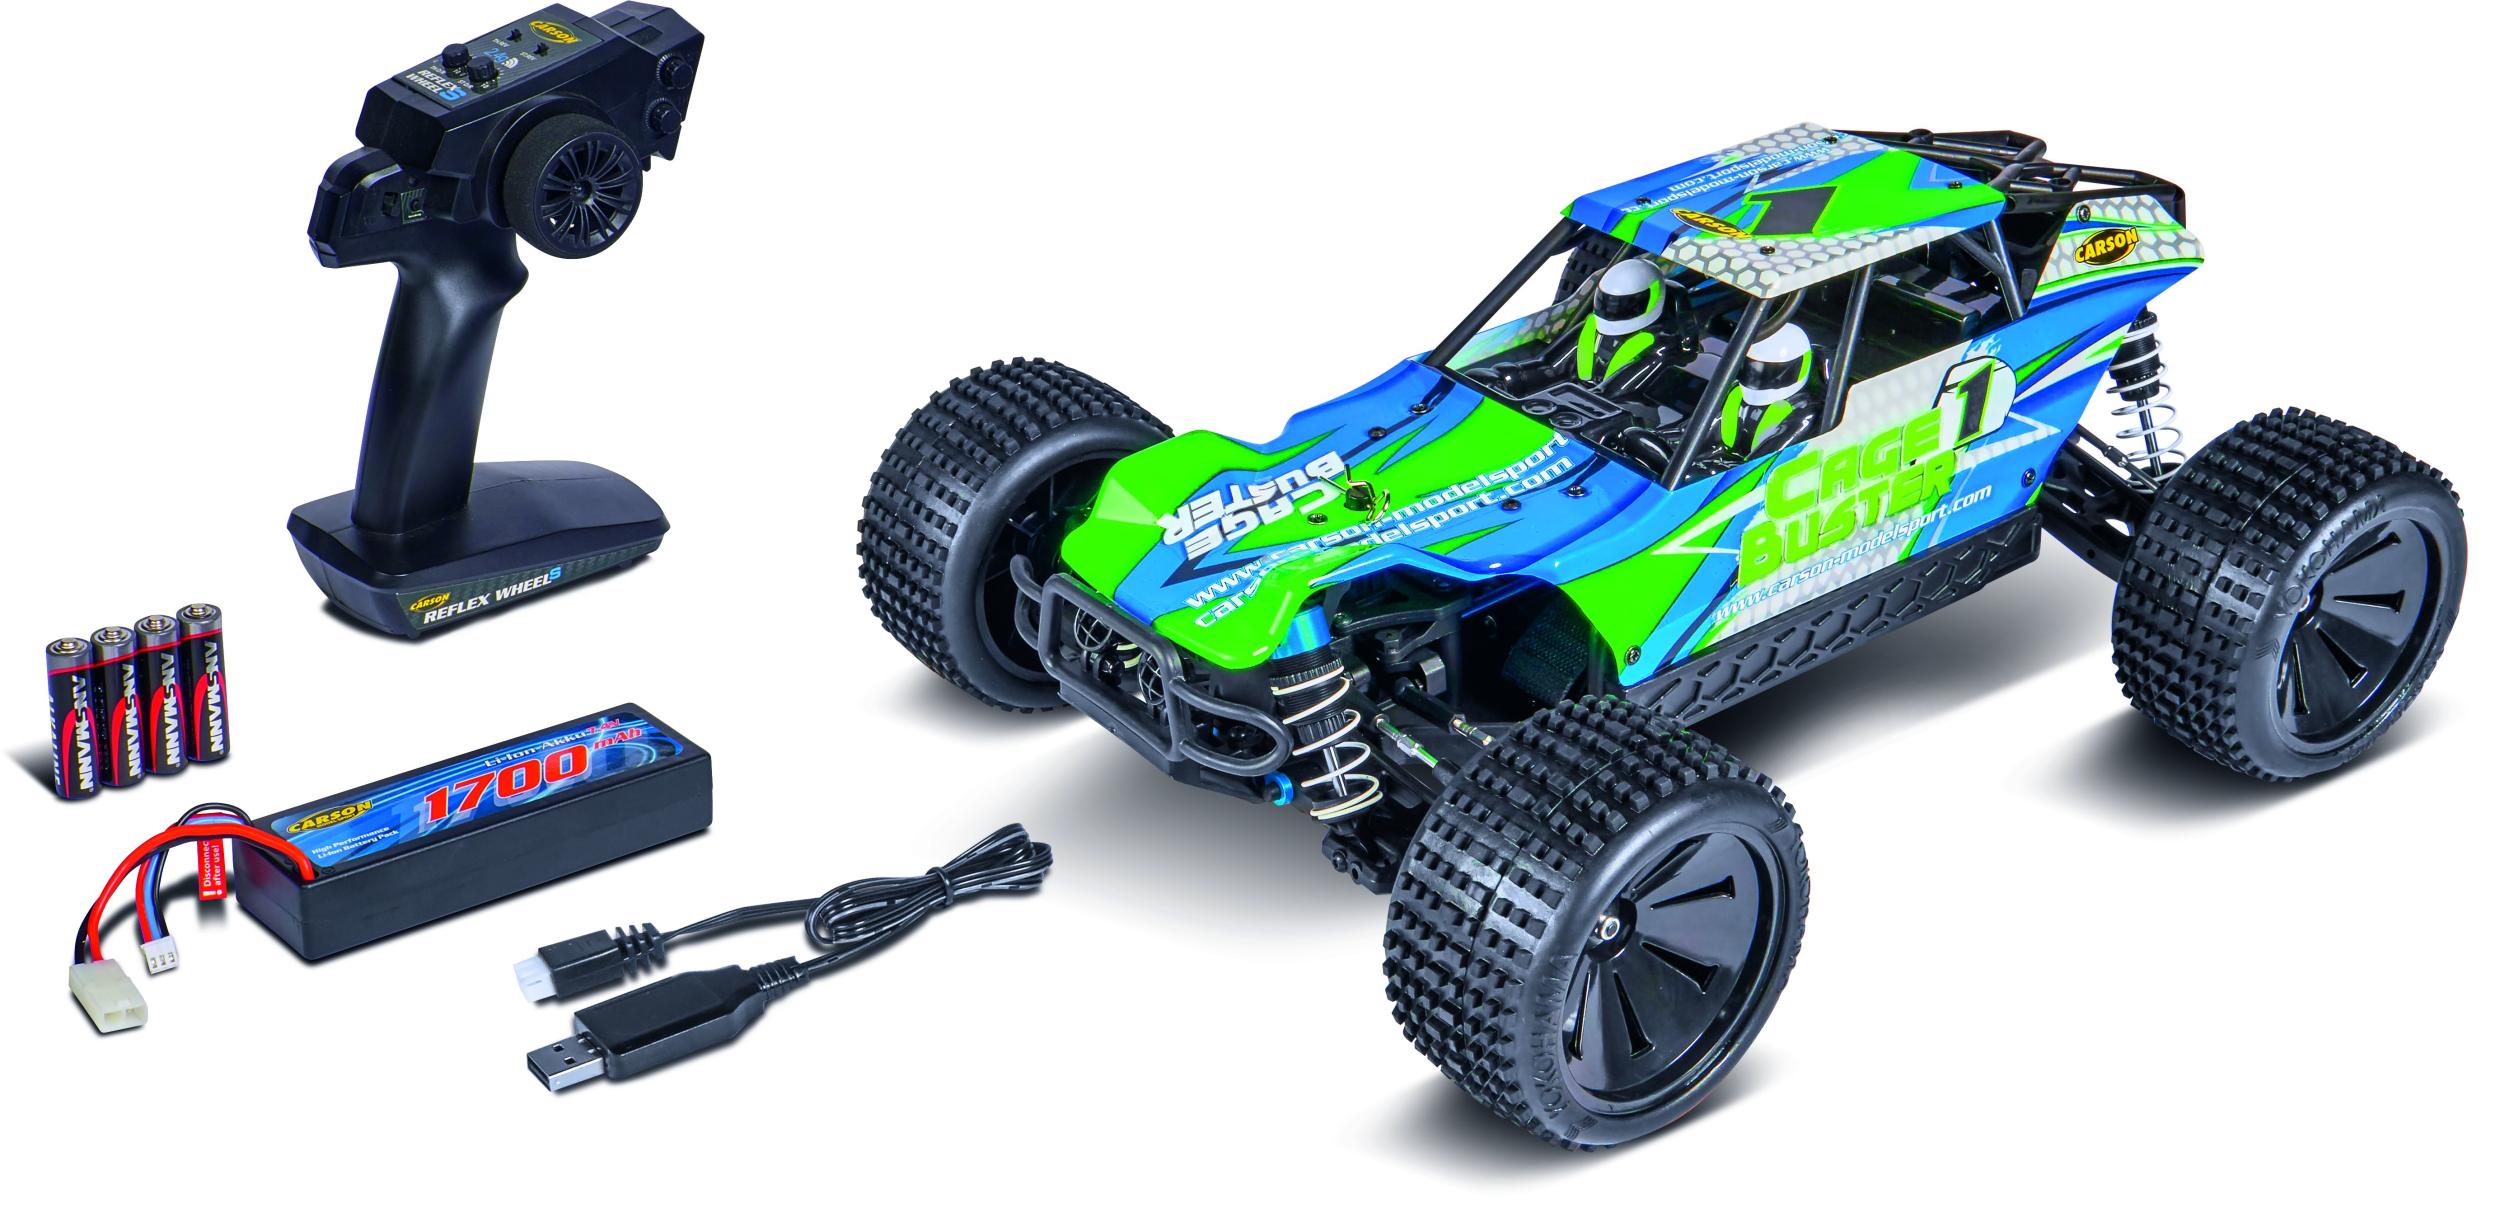 Carson 1:10 Cage Buster 4 WD 2.4GHz 100% RTR